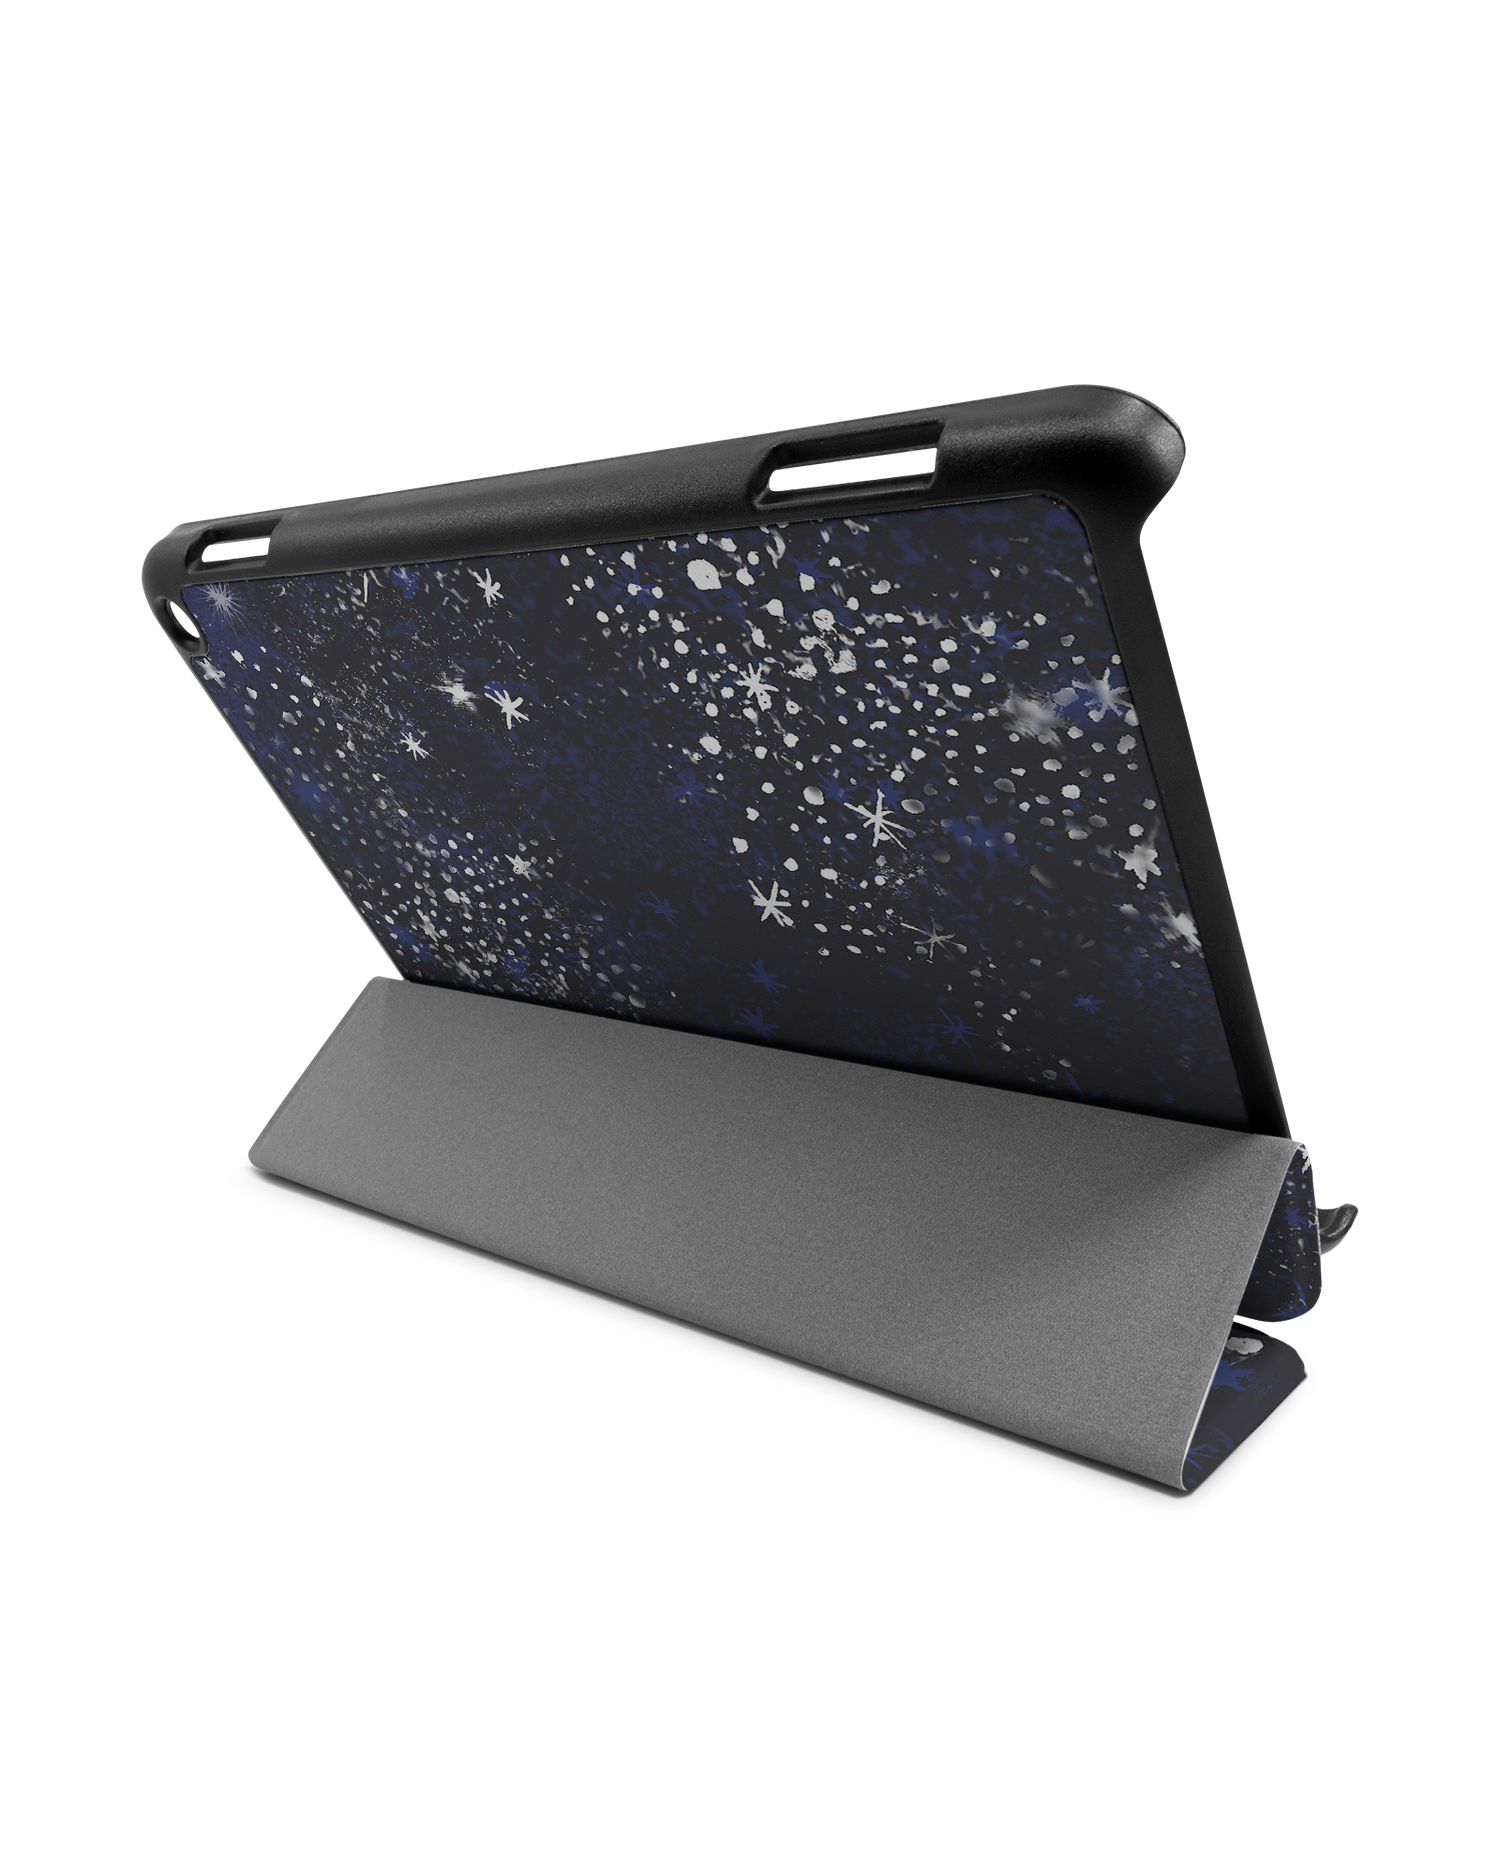 Starry Night Sky Tablet Smart Case for Amazon Fire HD 8 (2022), Amazon Fire HD 8 Plus (2022), Amazon Fire HD 8 (2020), Amazon Fire HD 8 Plus (2020): Used as Stand